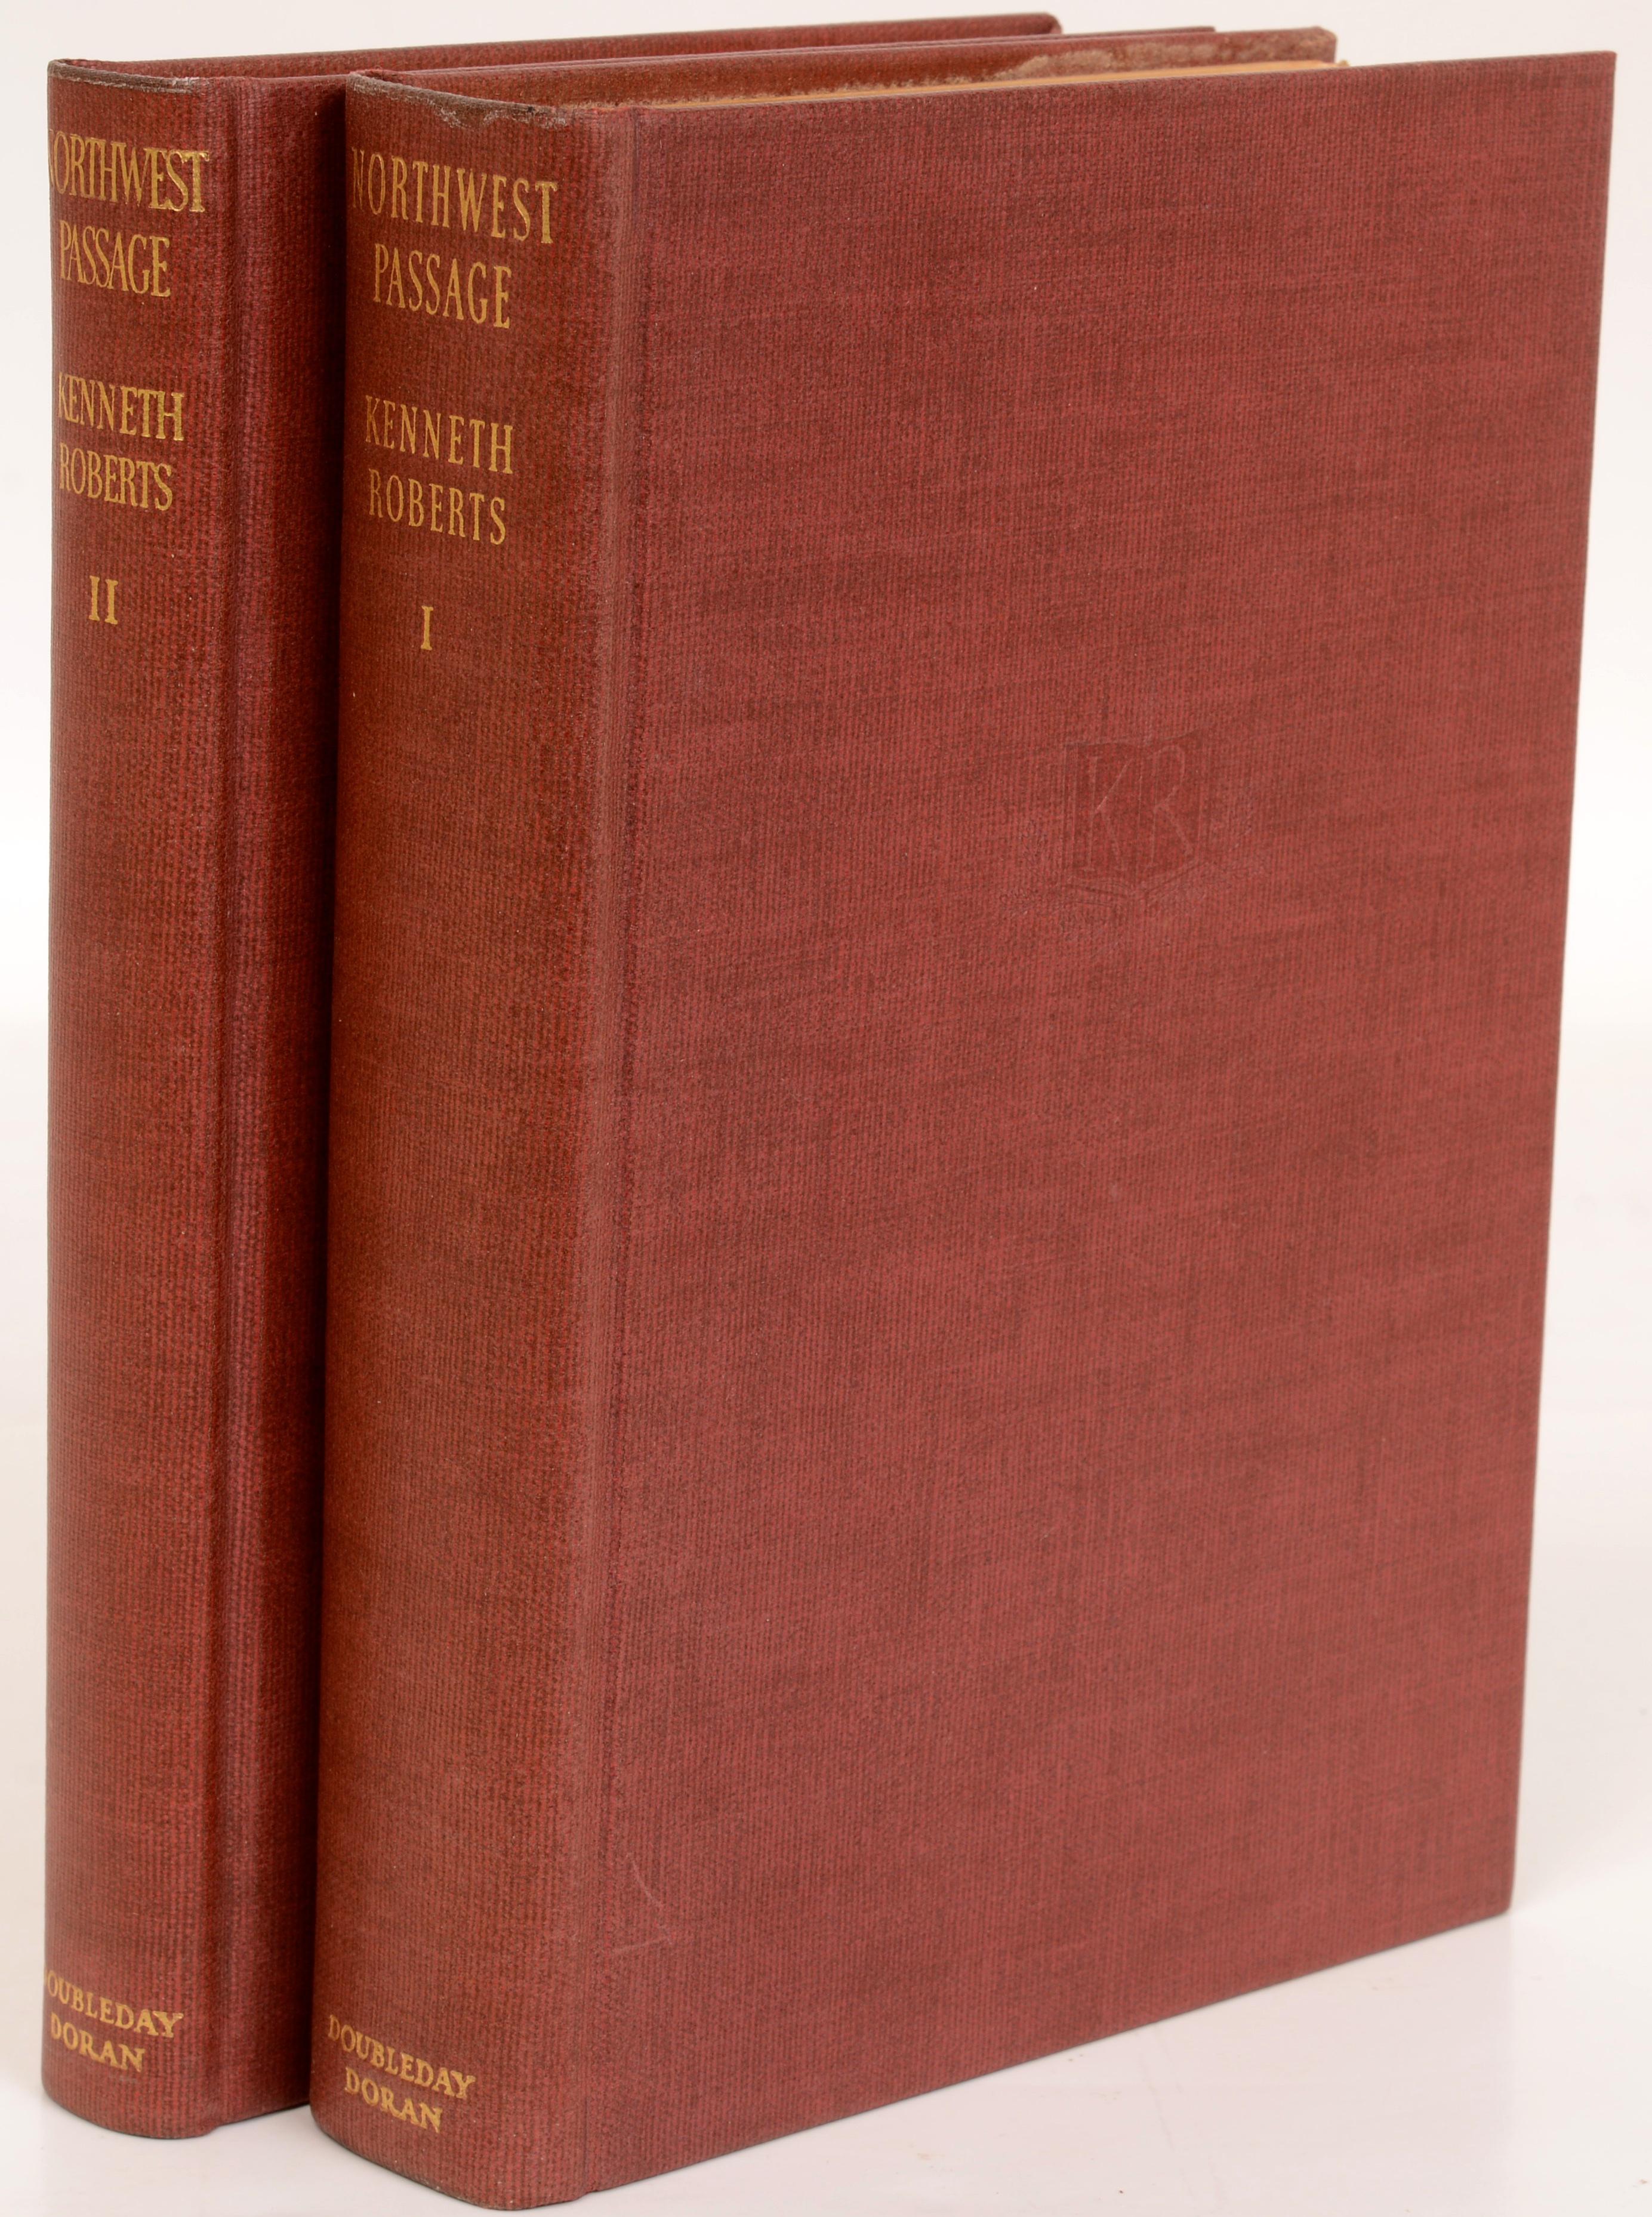 Paper Northwest Passage 1st Limited 2 Vol Ed by Kenneth Roberts, Signed & Numbered  For Sale